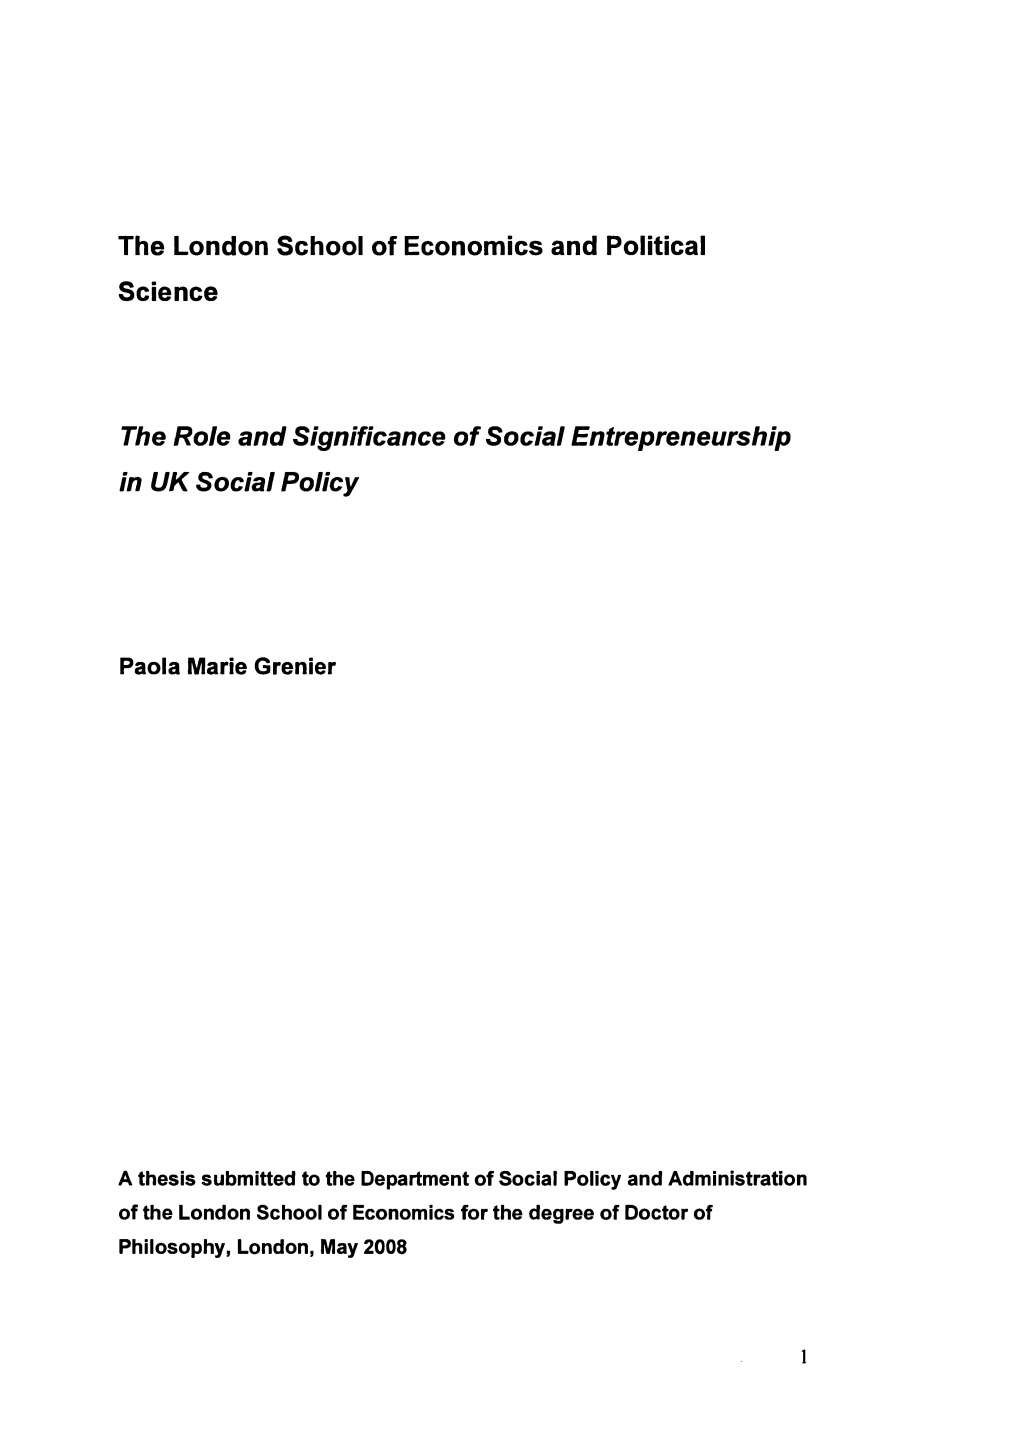 The London School of Economics and Political Science the Role And